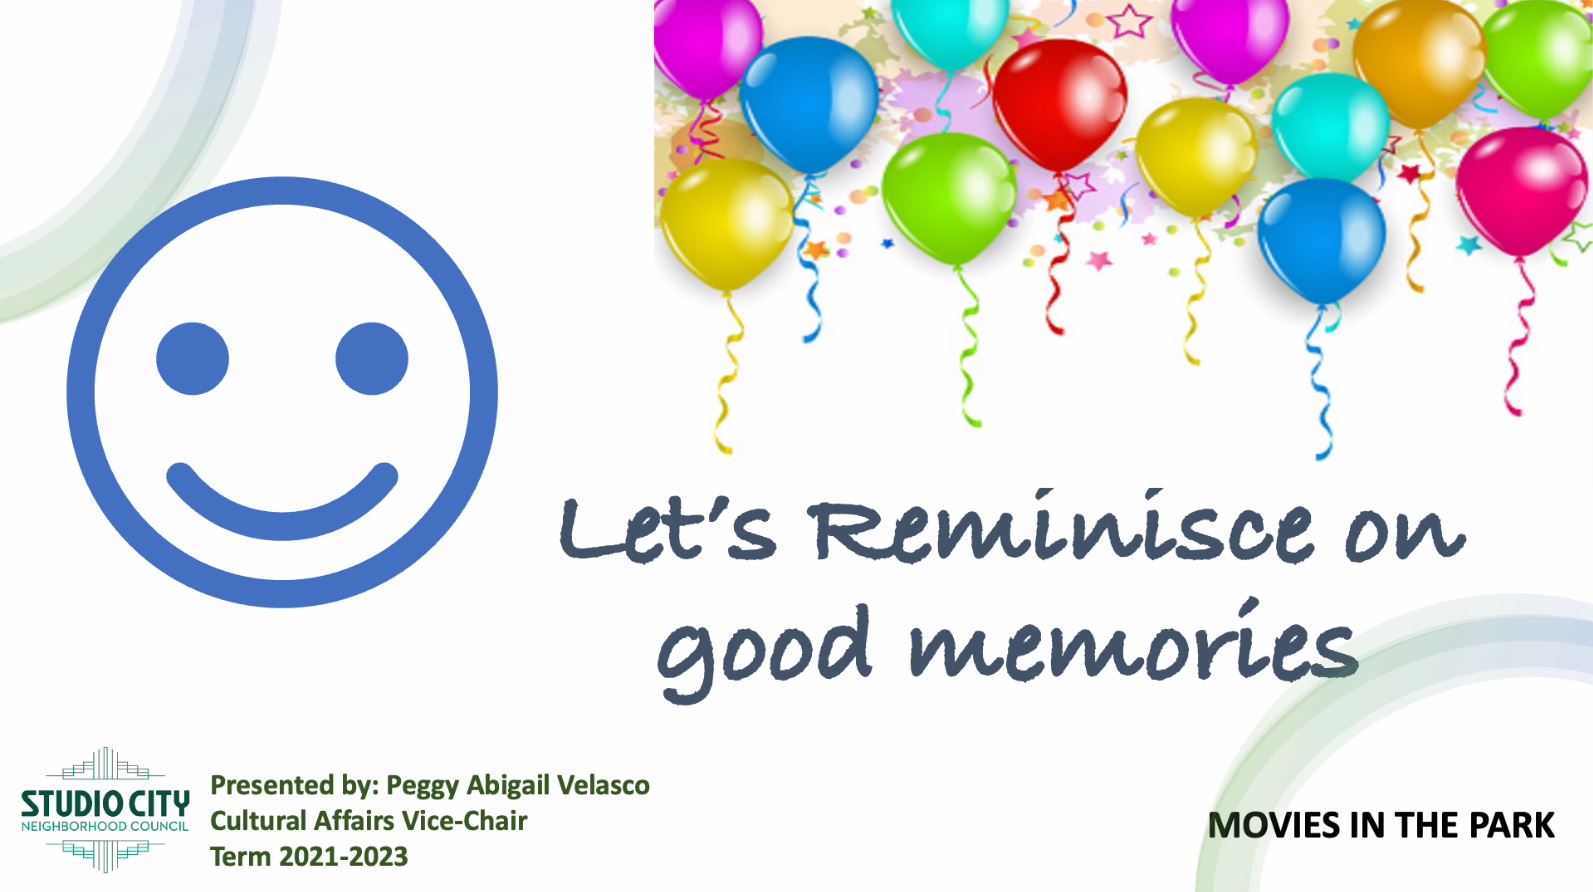 As the current term of the SCNC draws to a close, please click  to view SCNC Good Memories by Abi Velasco Board Member and Cultural Affairs Vice Chair.